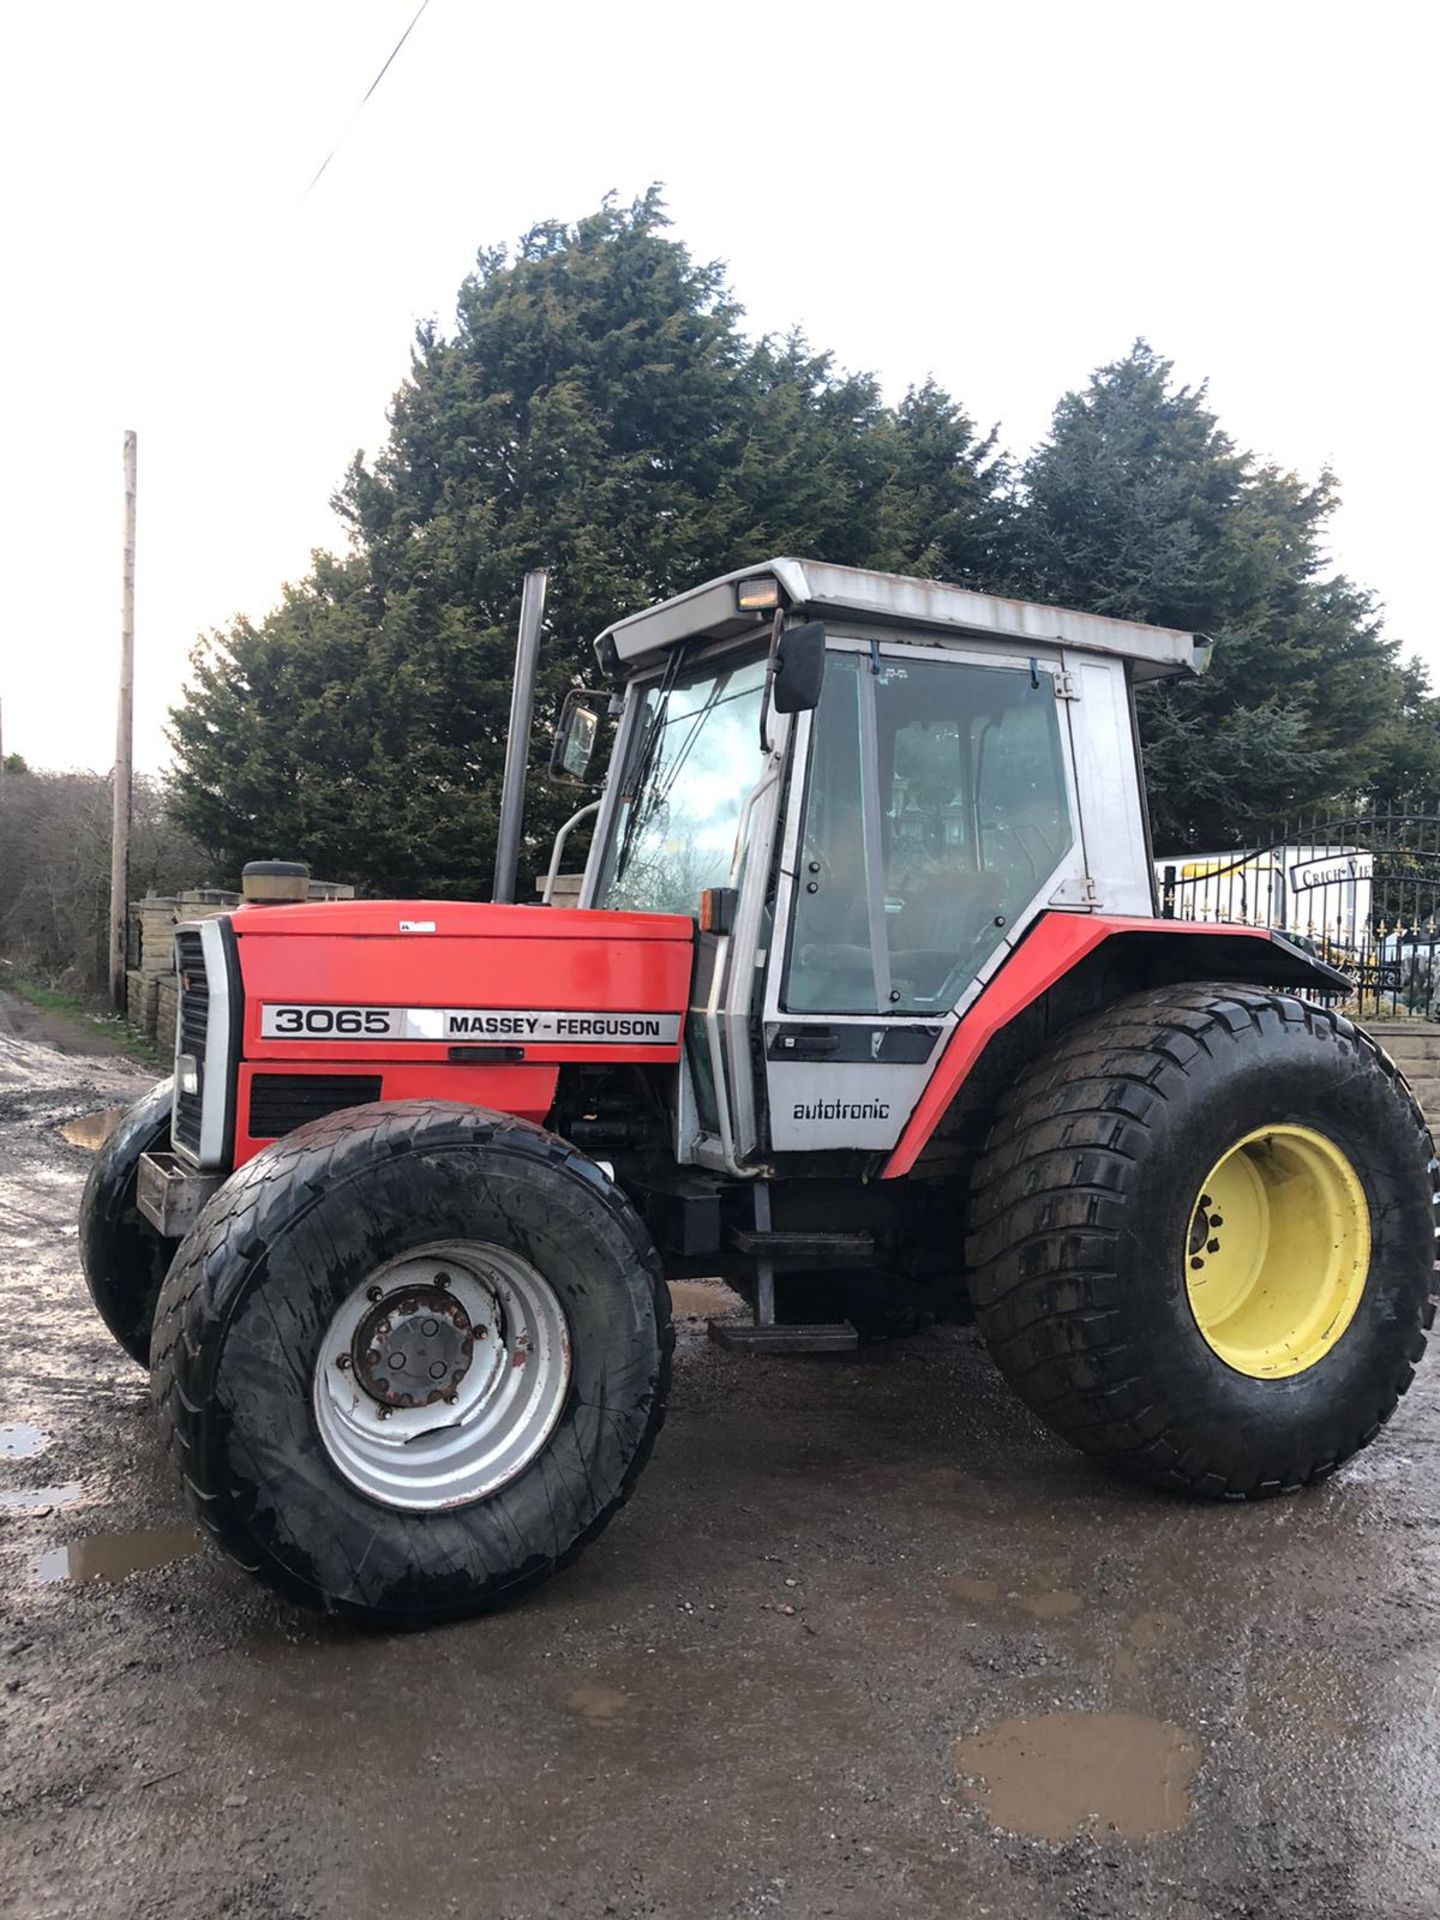 MASSEY FERGUSON 3065 TRACTOR, RUNS AND WORKS, 3 POINT LINKAGE, YEAR 1992, ROAD REGISTERED *PLUS VAT* - Image 3 of 8